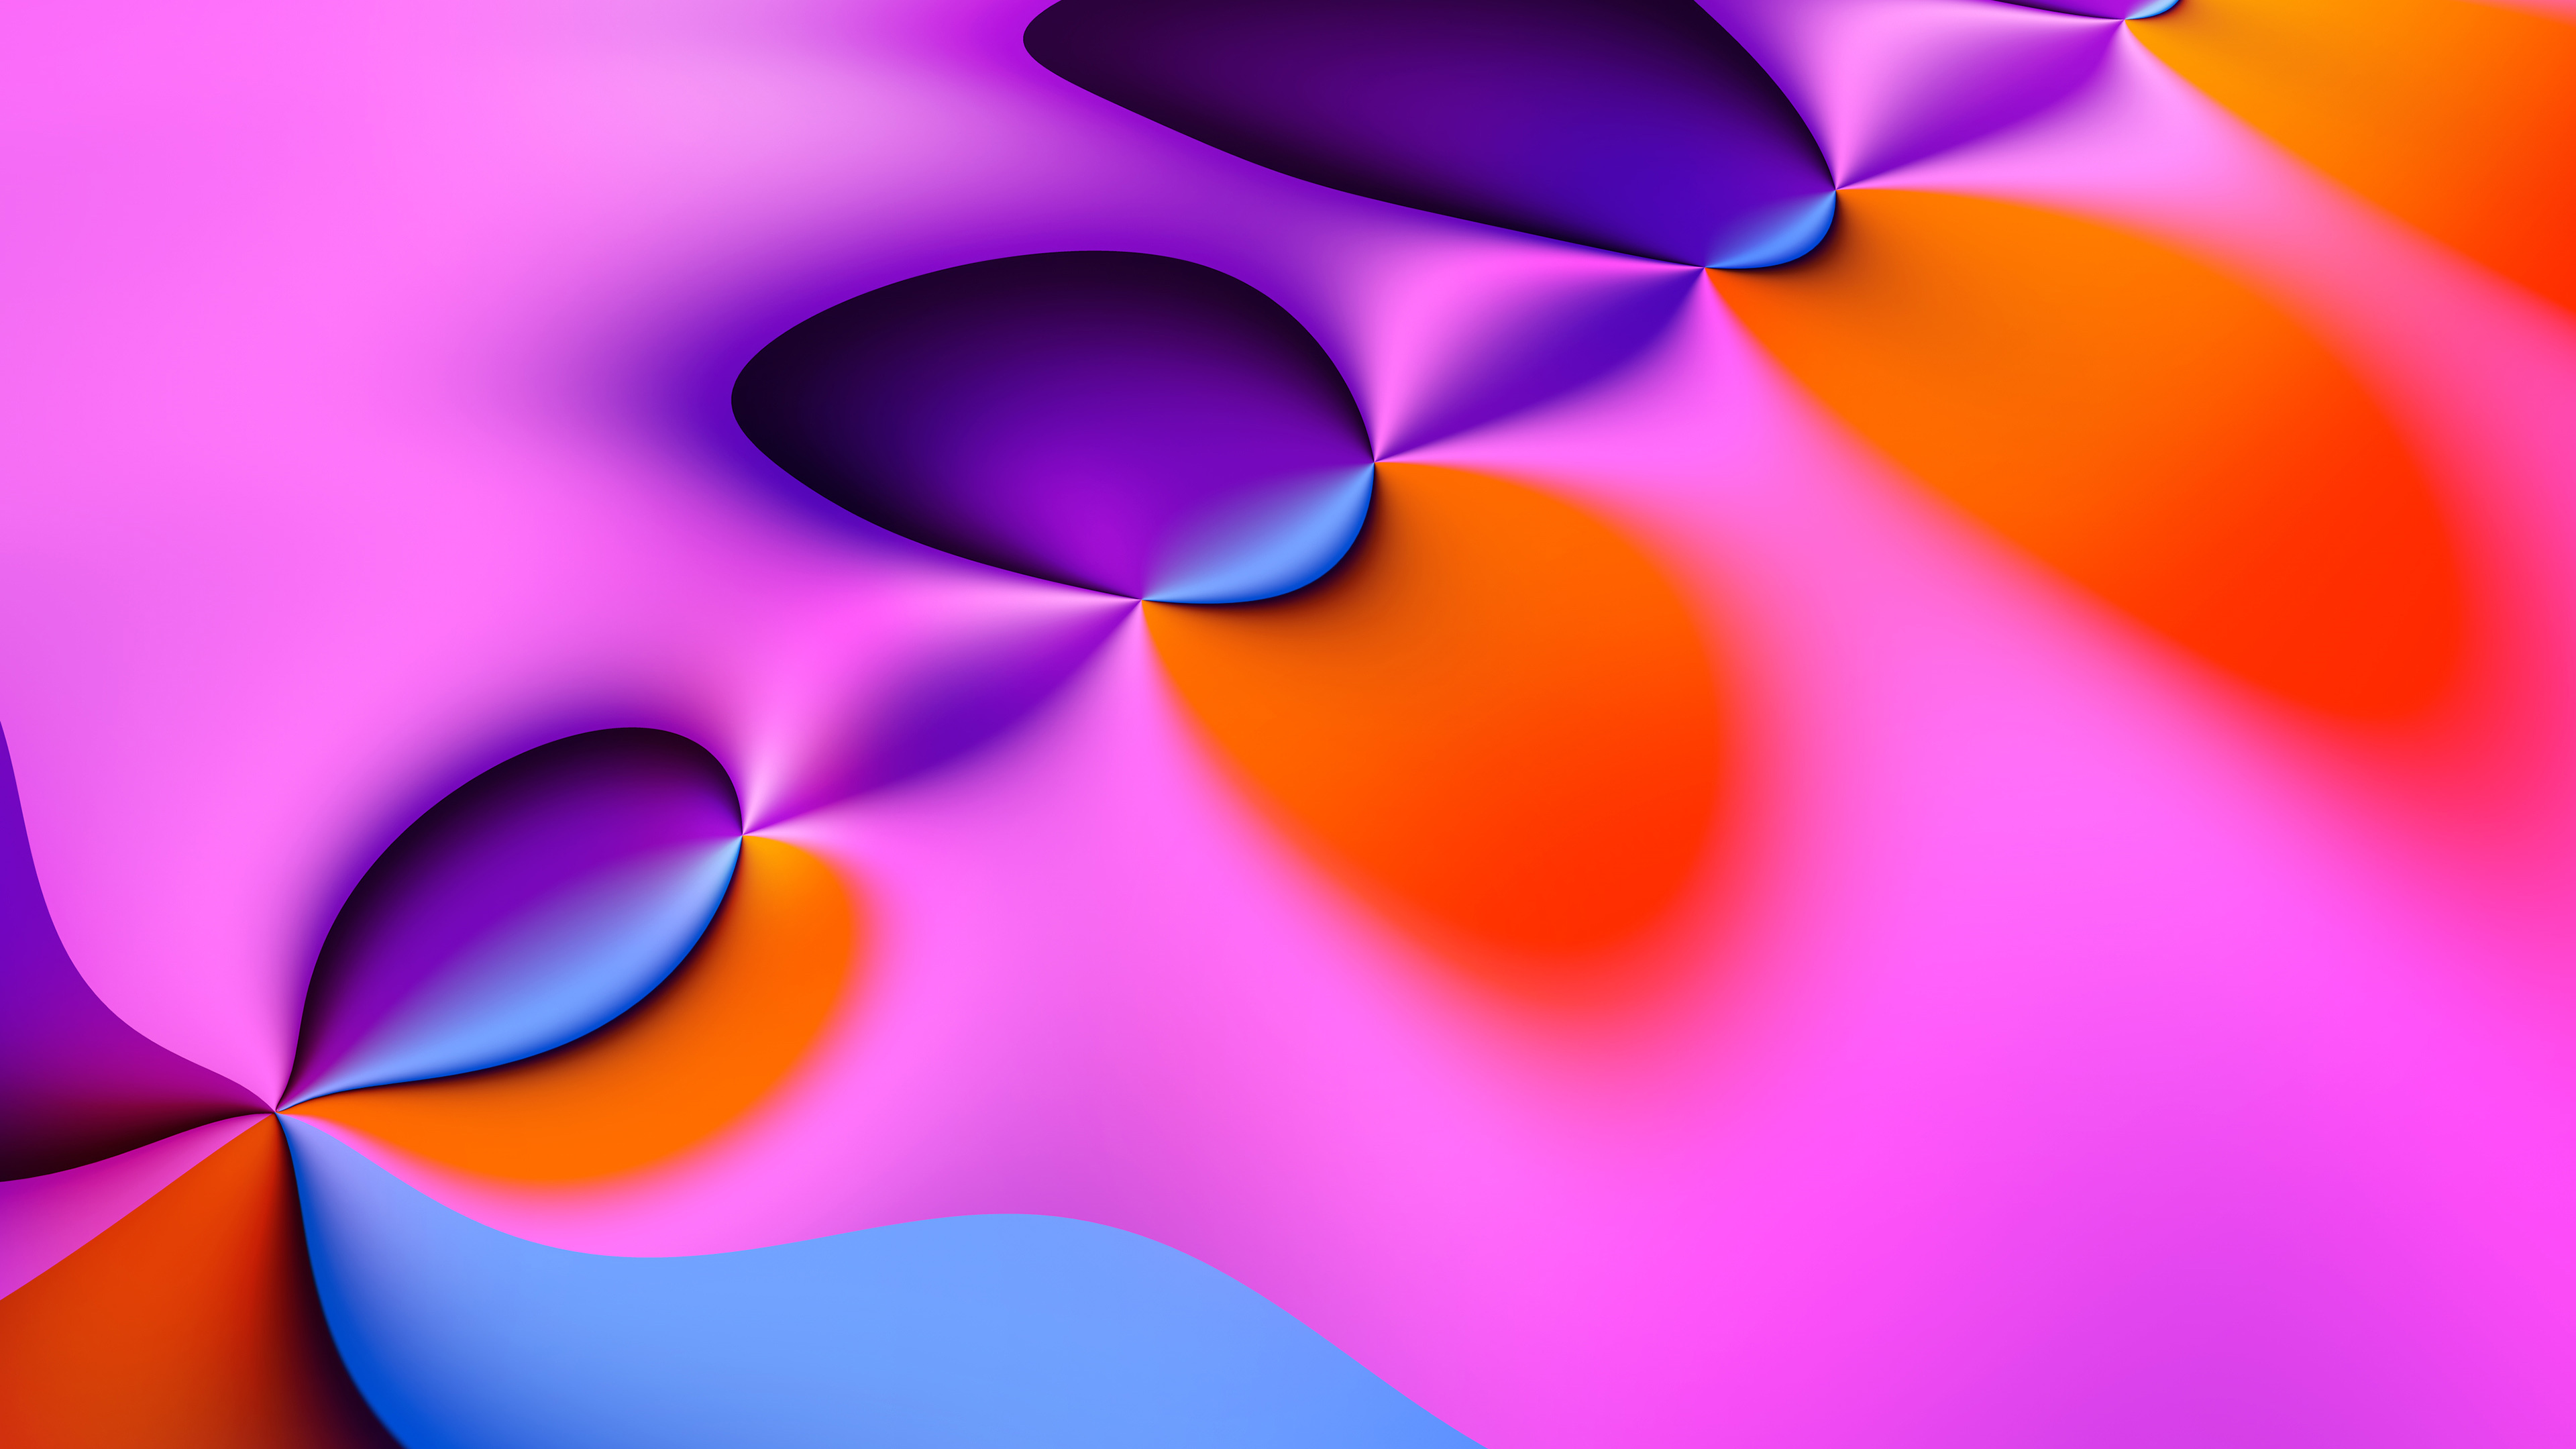 Purple Orange and Yellow Abstract Painting. Wallpaper in 3840x2160 Resolution